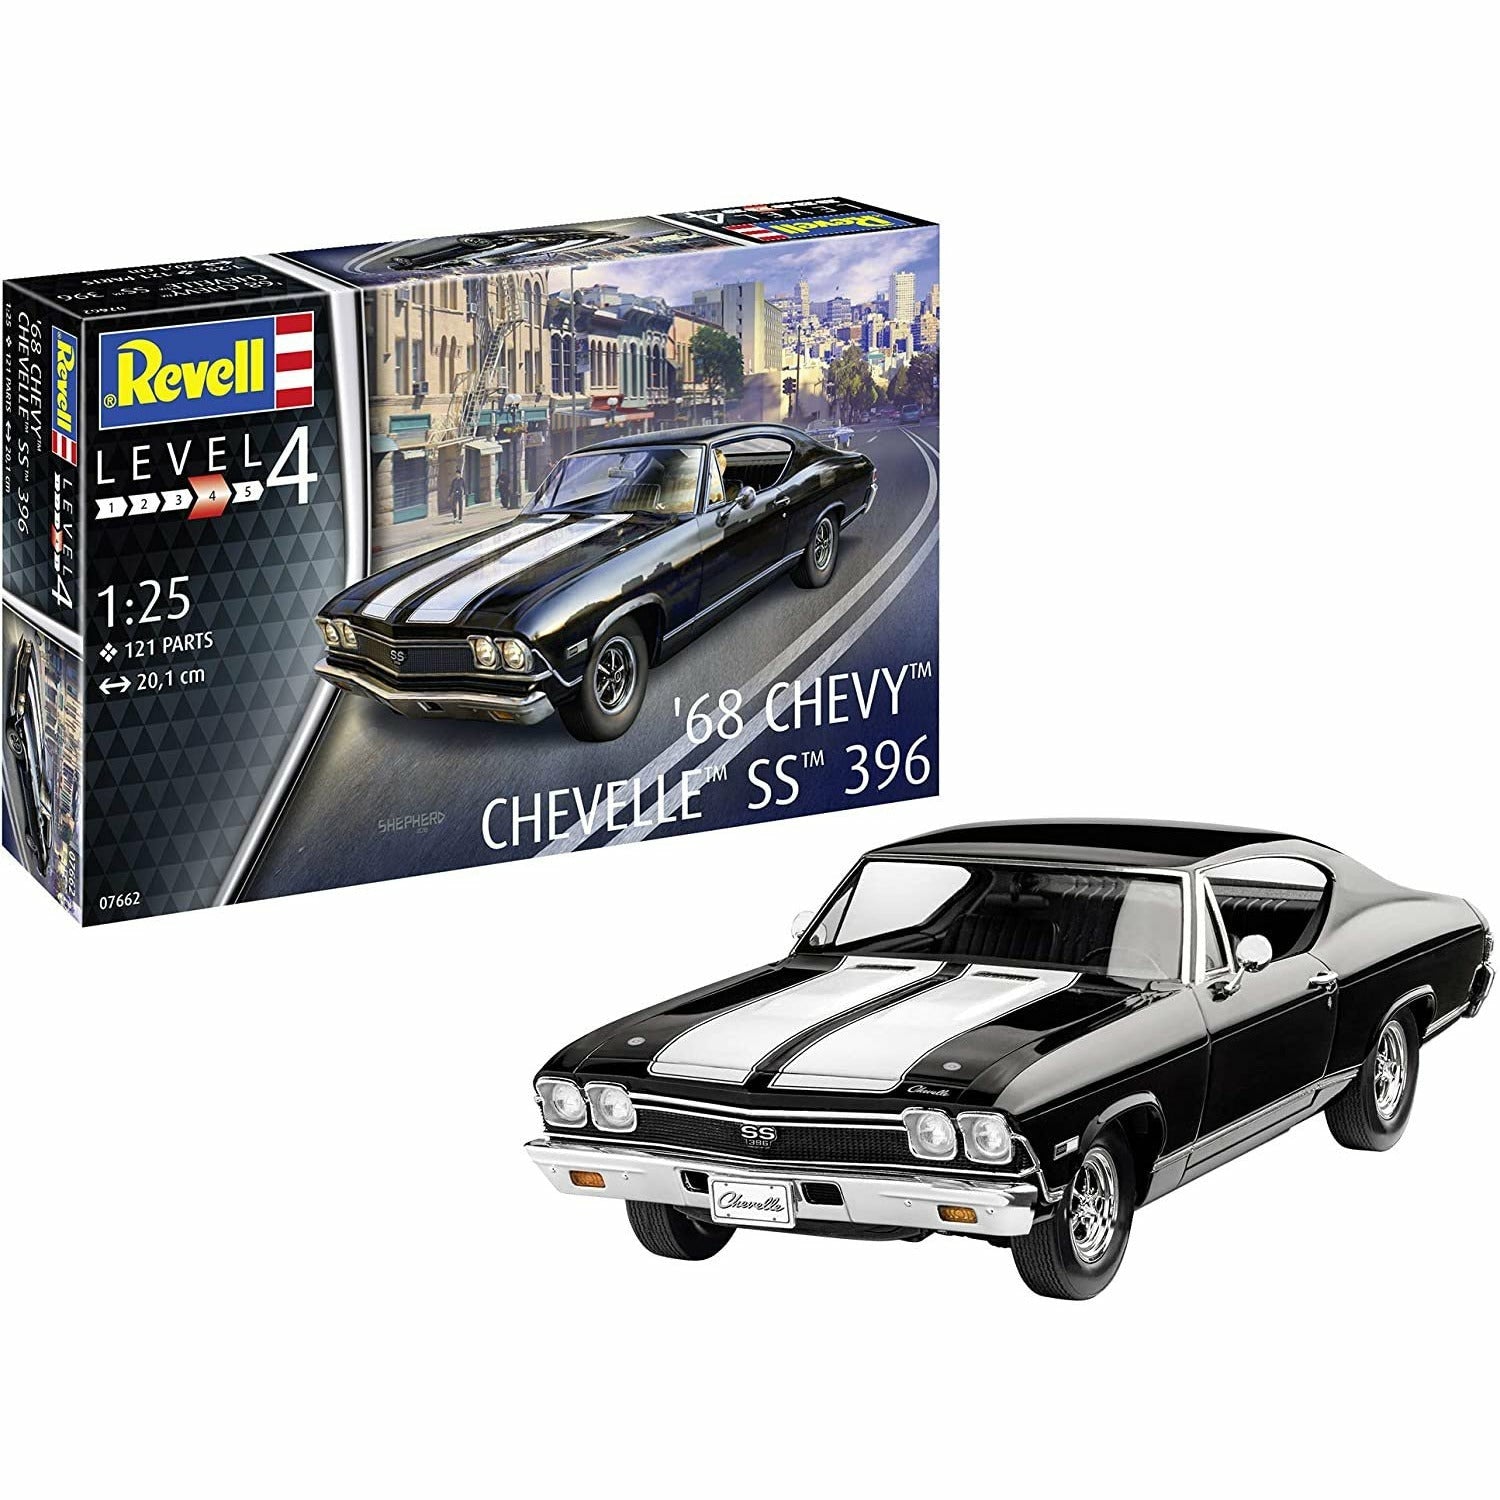 1968 Chevy Chevelle SS 396 1/25 Model Car Kit #07662 by Revell